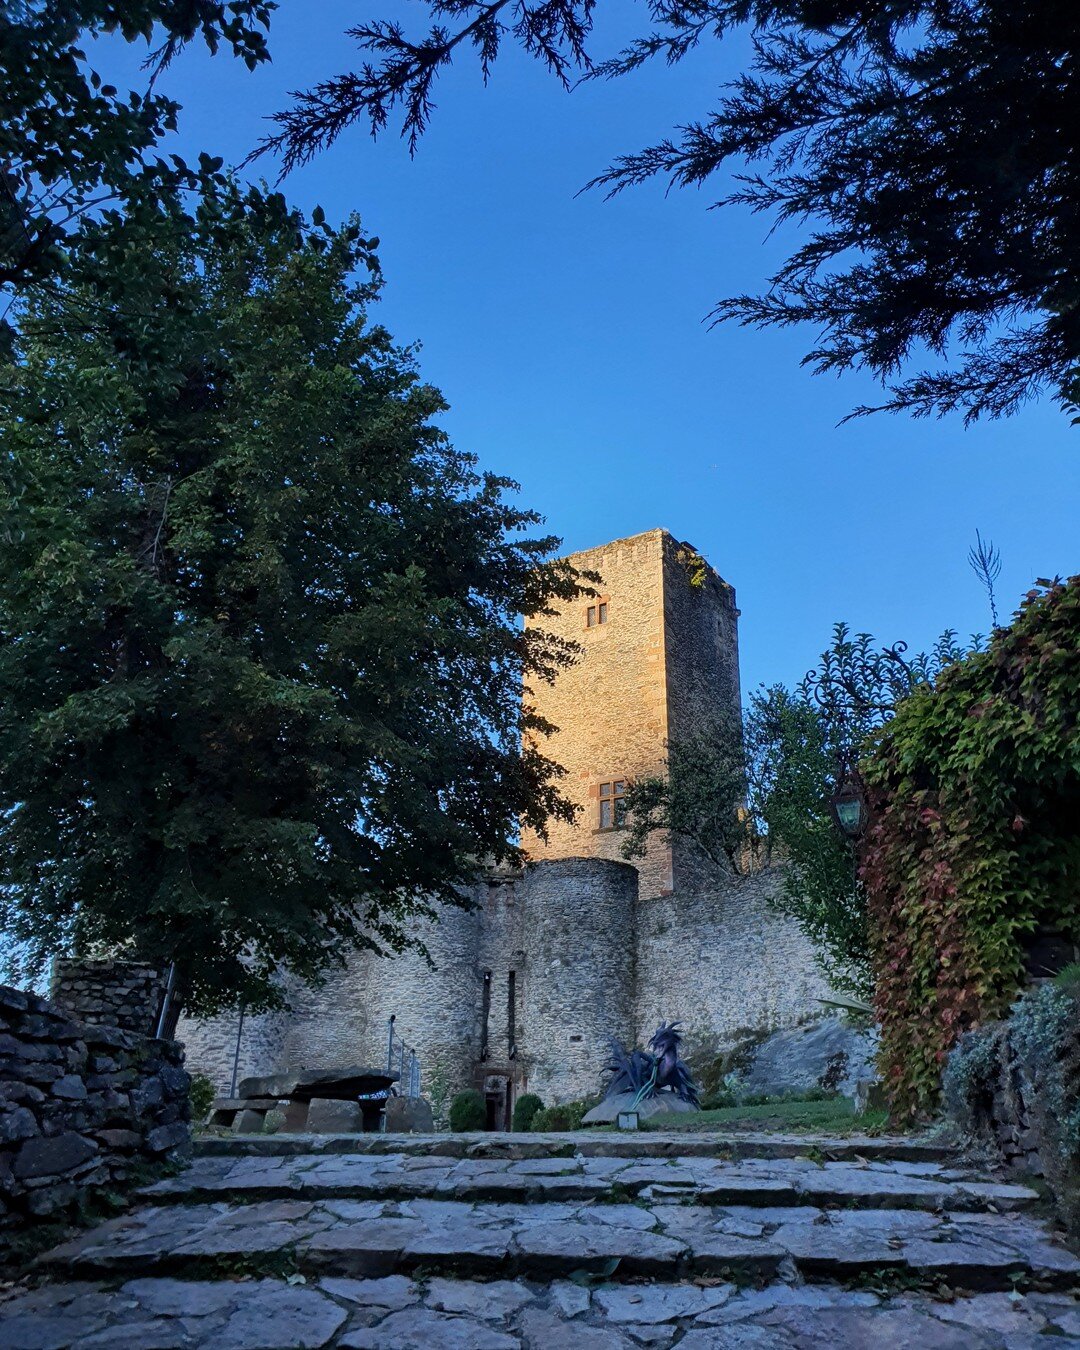 The first lights of the morning shine on the millenary stones of Ch&acirc;teau Belcastel 🌄

#chateaubelcastel #chateaulife #castleofinstagram #historygeek #historygram #historyplace #castlemypassion #voyager #voyageur #voyagemagazine #voyagedexplore